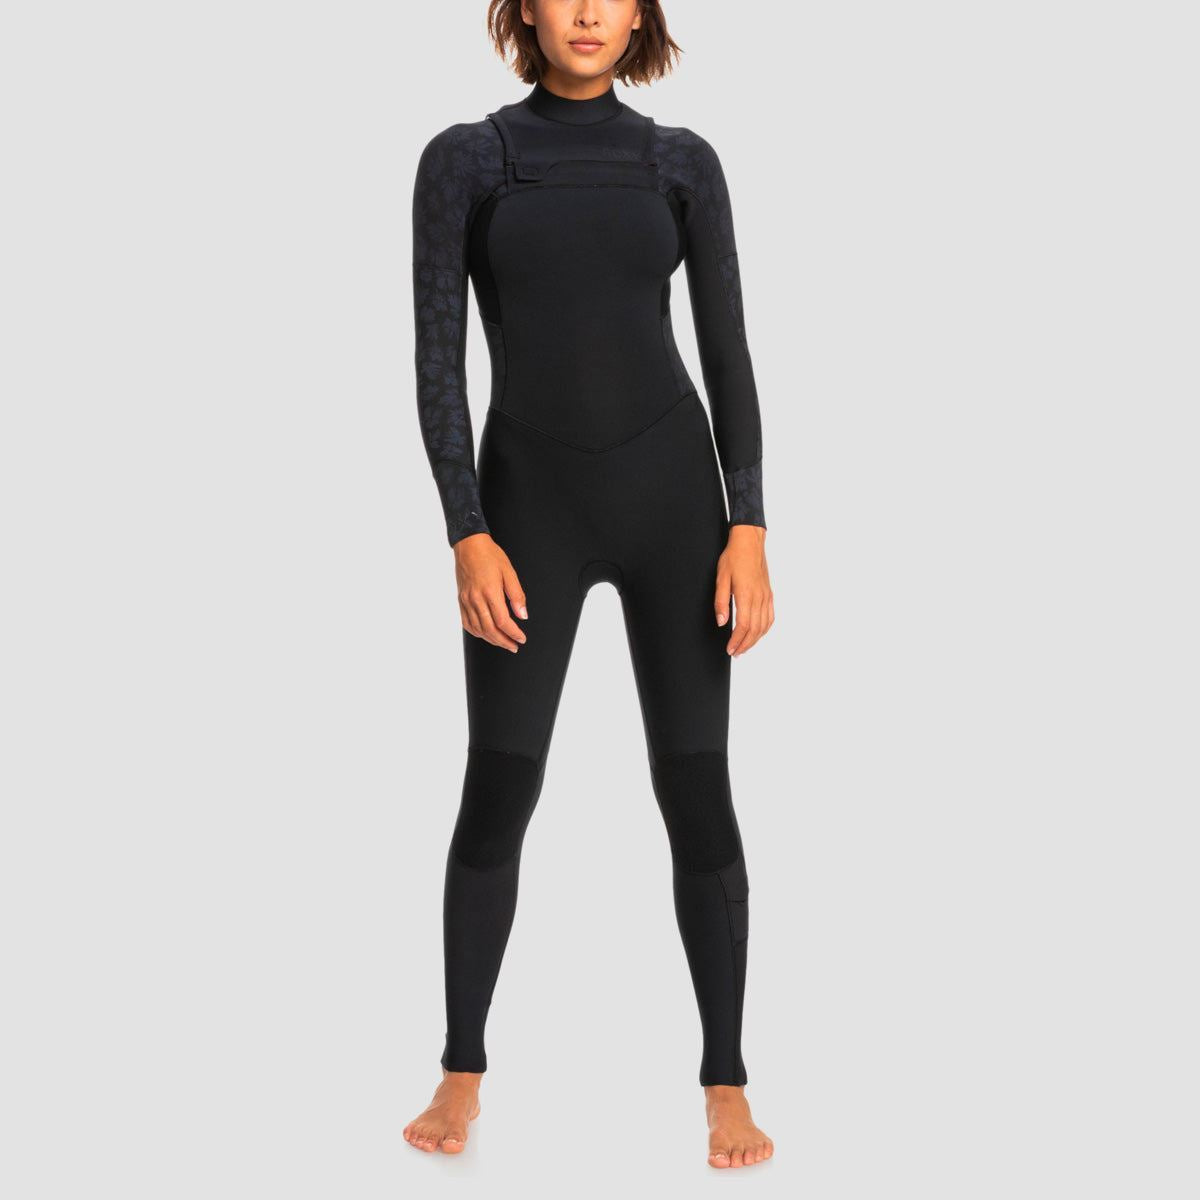 Roxy Swell Series 4/3mm Chest Zip Wetsuit Black - Womens